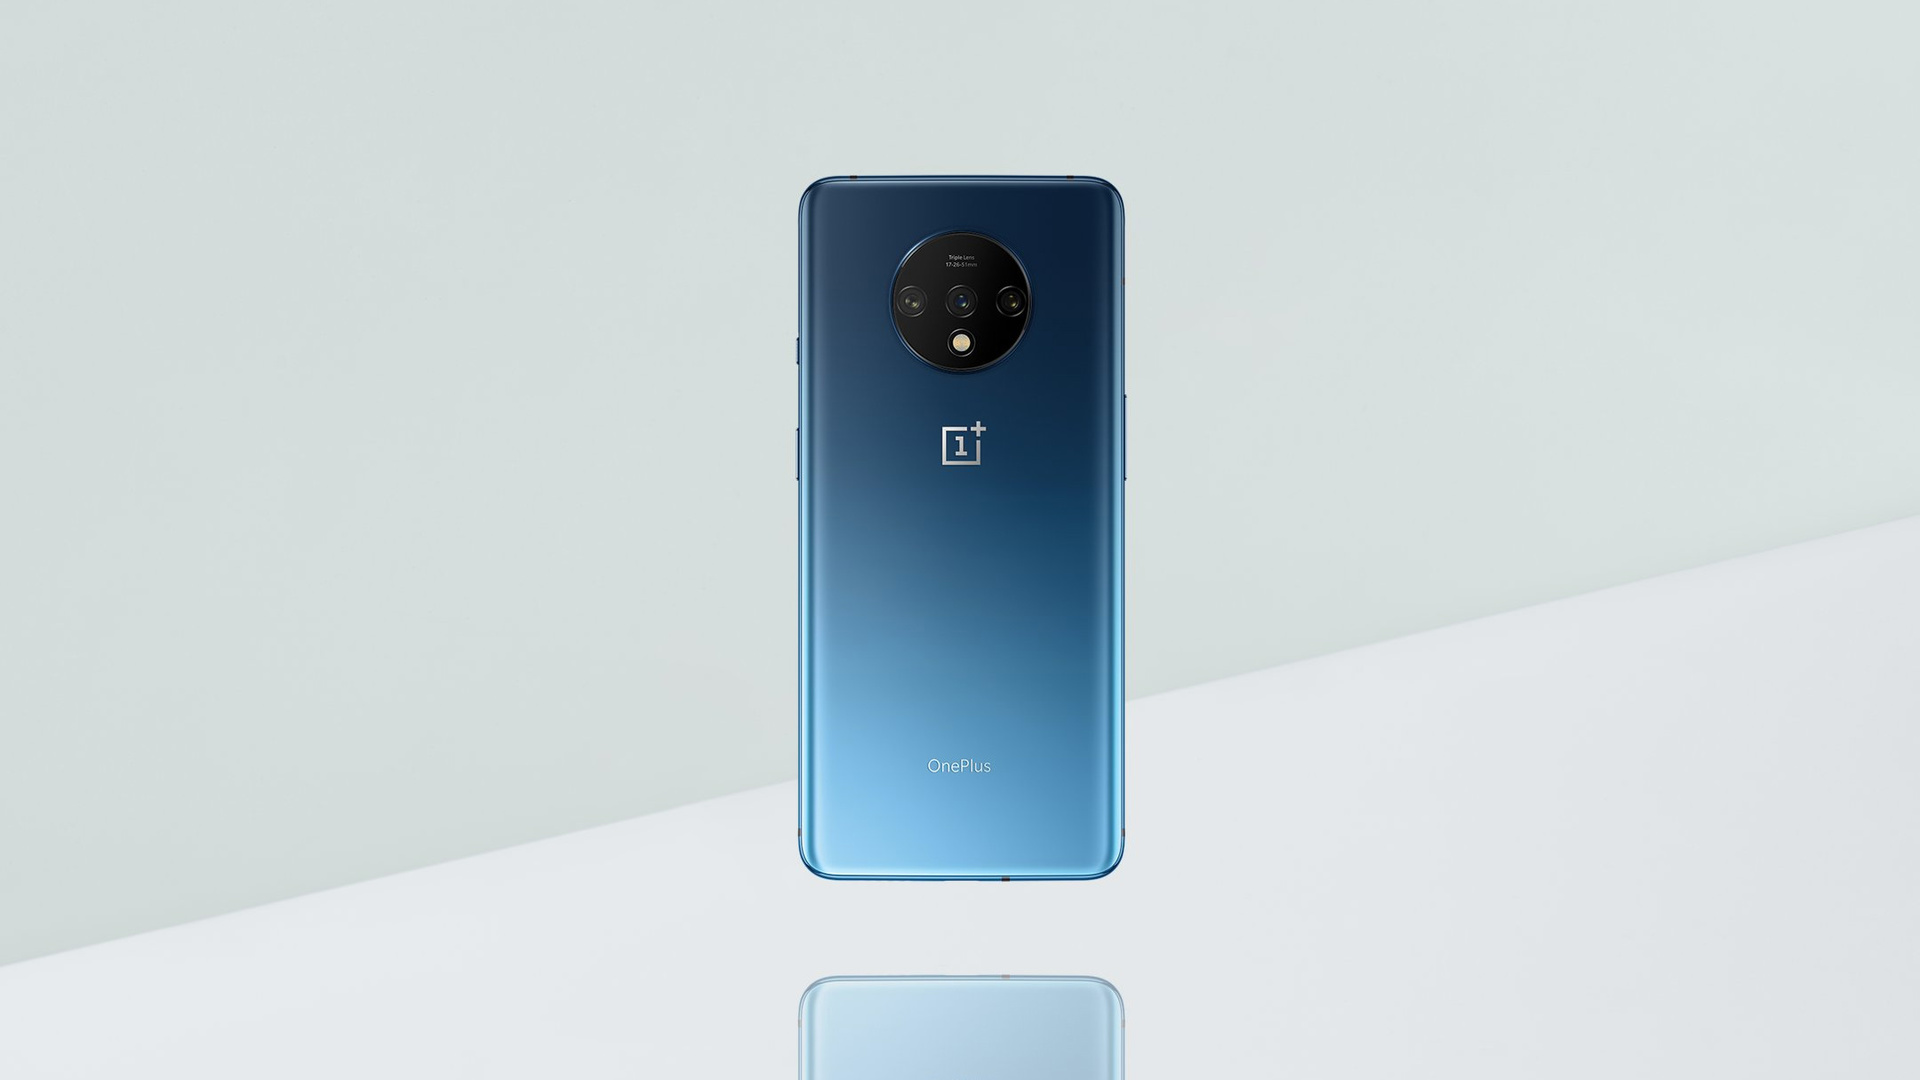 The OnePlus 7T will offer Warp Charge 30T technology.